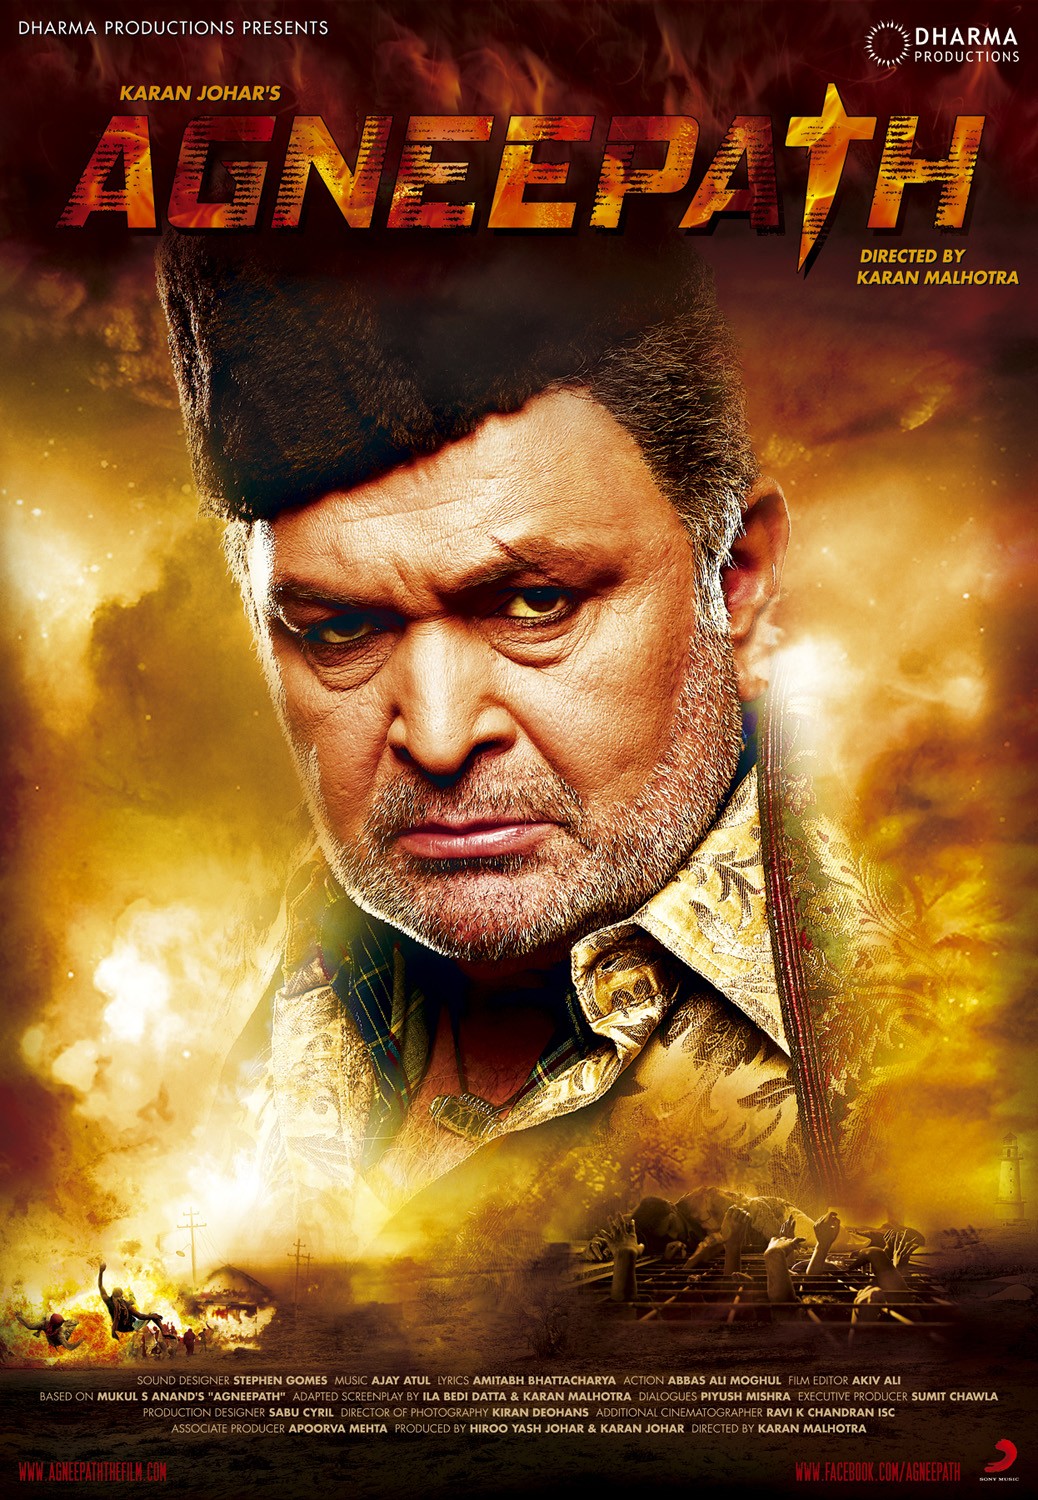 Extra Large Movie Poster Image for Agneepath (#5 of 6)